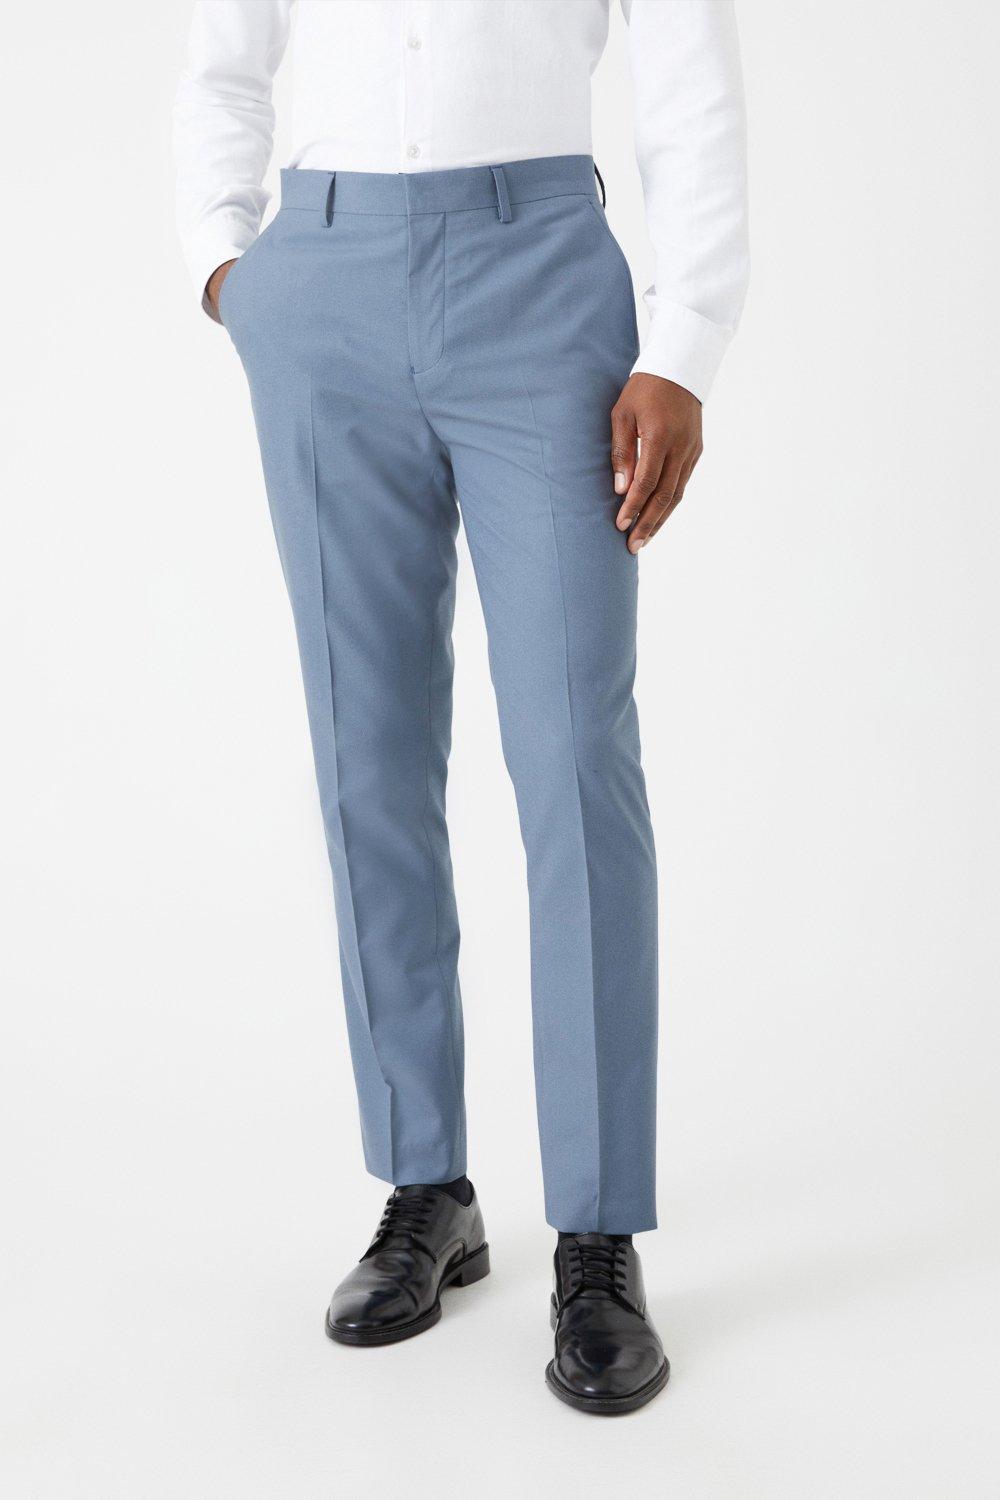 Shop Red Herring Mens Chinos up to 70 Off  DealDoodle